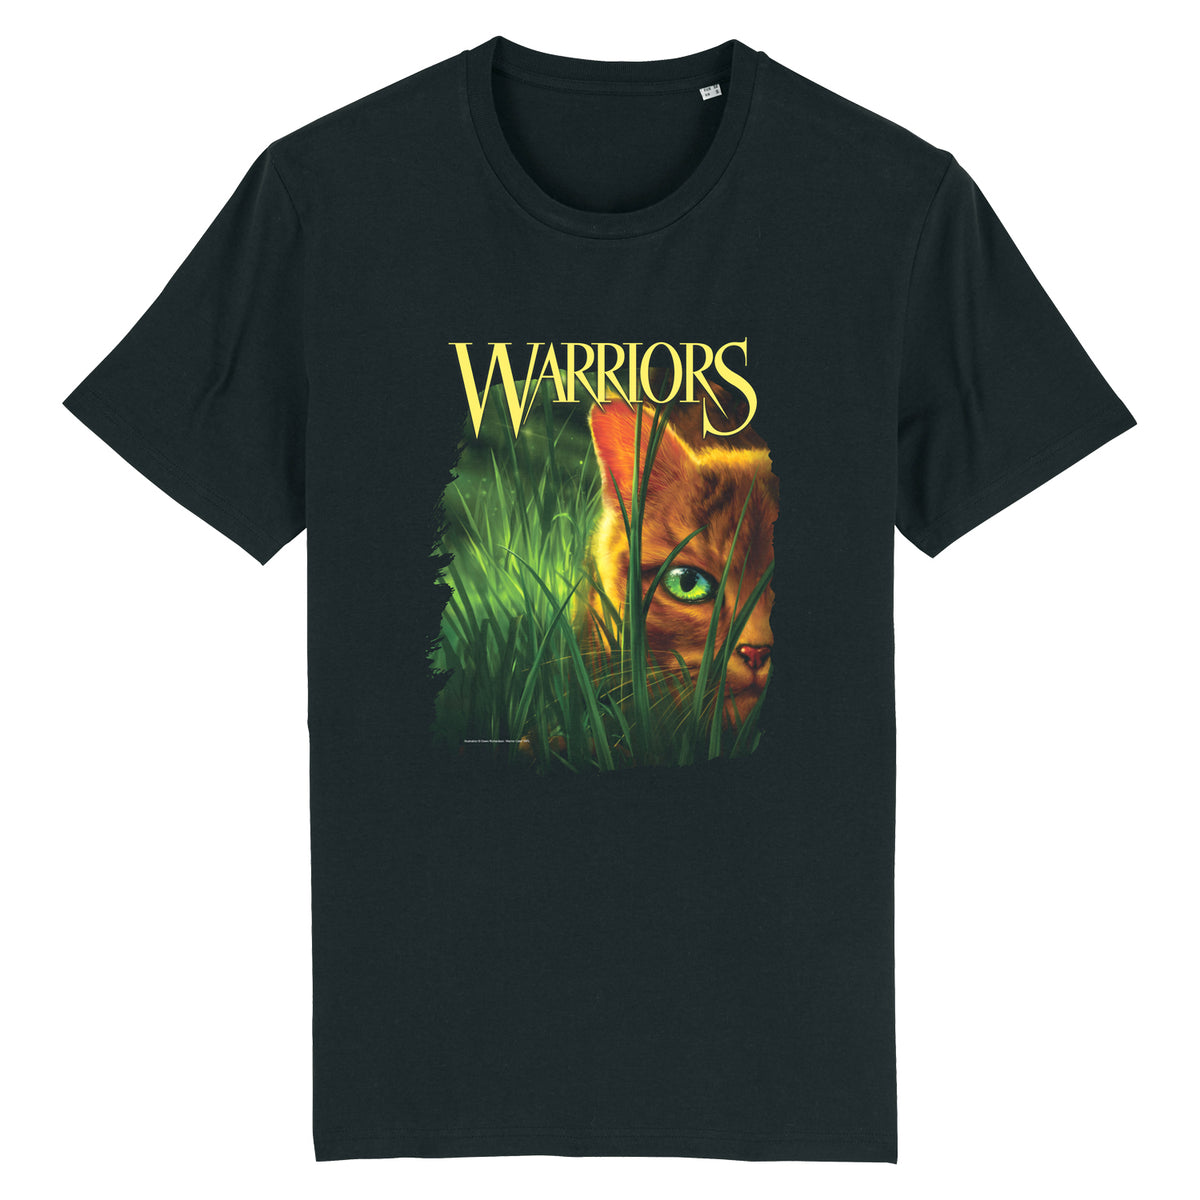 Into The Wild - Adult Unisex T-Shirt